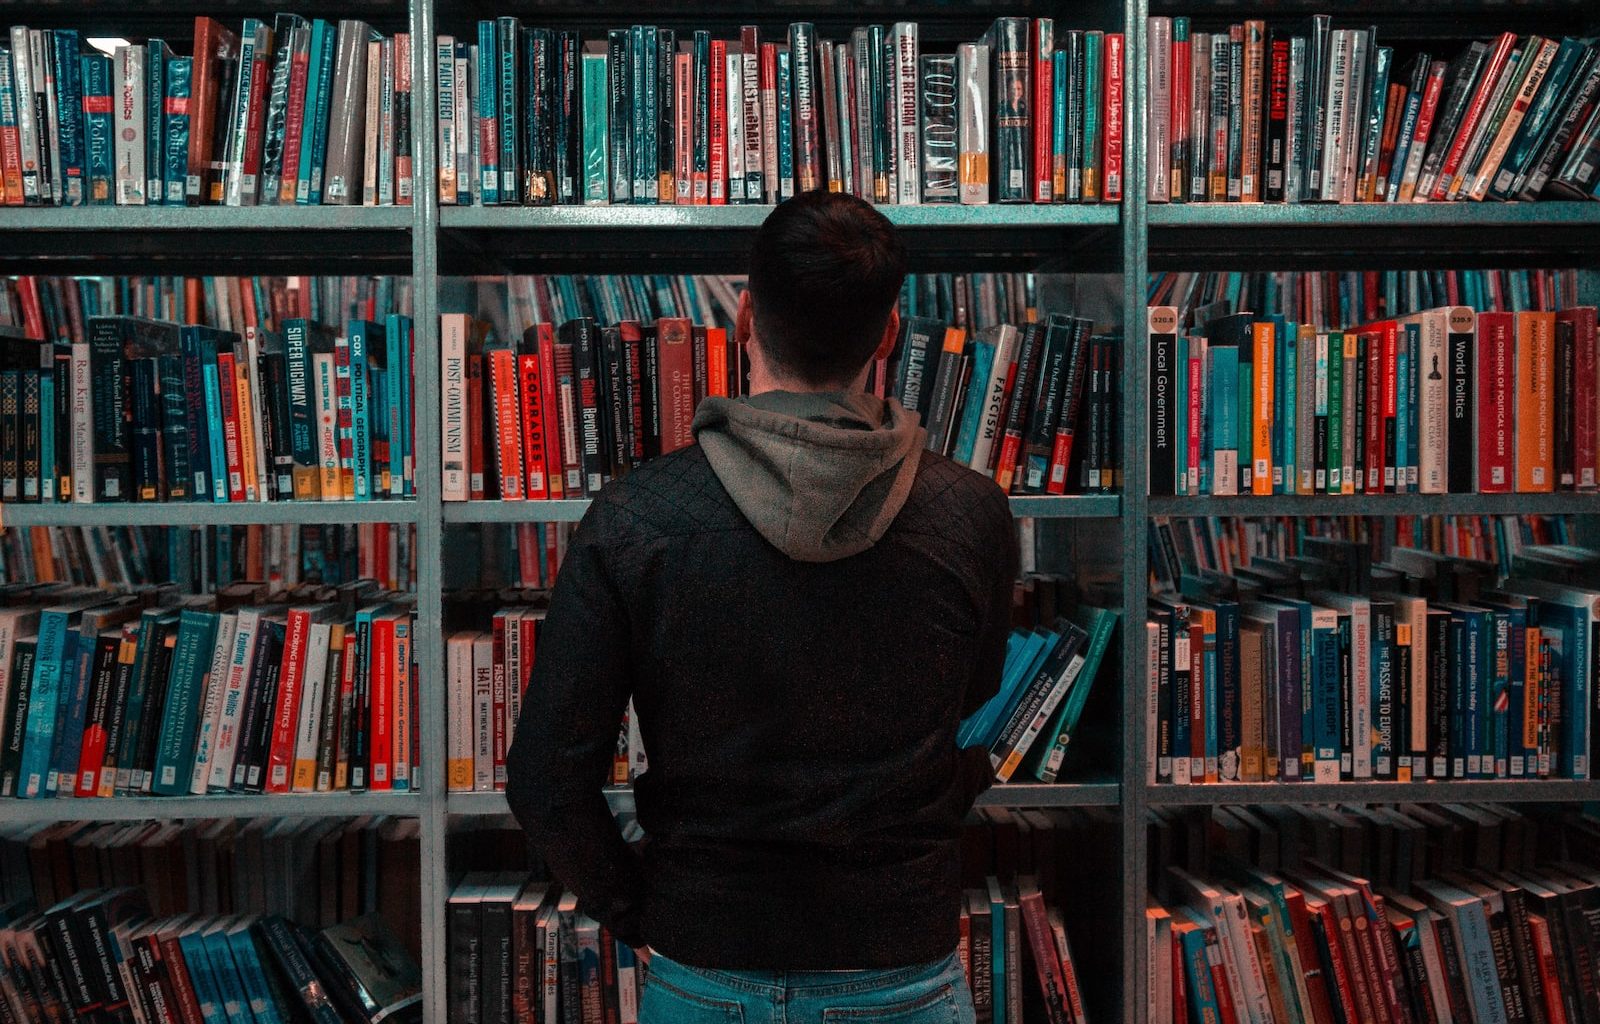 person wearing black and gray jacket in front of bookshelf